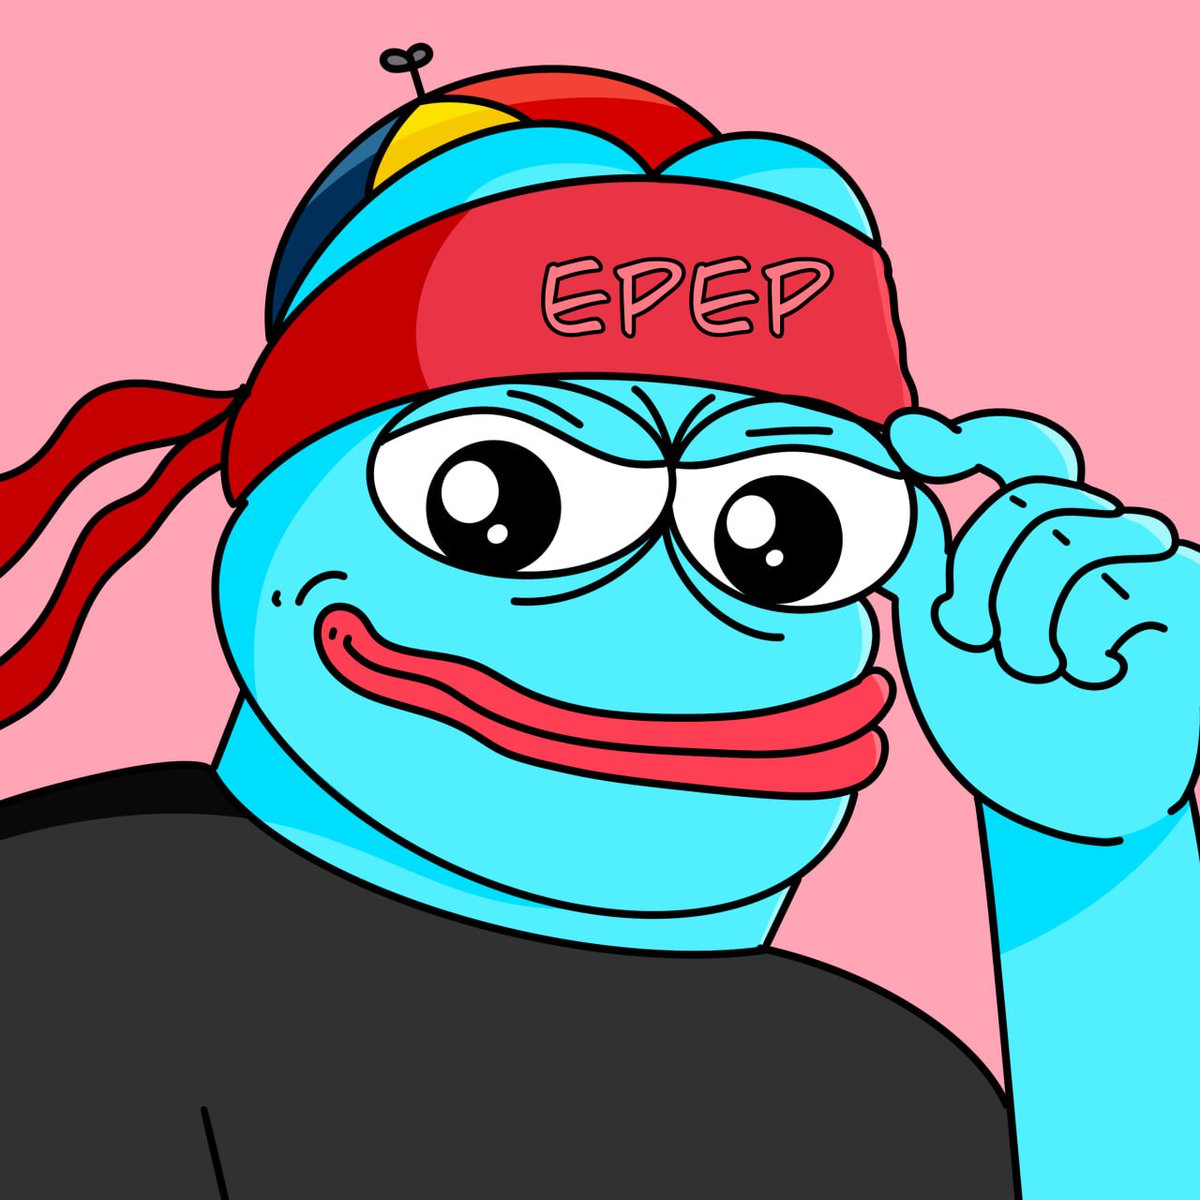 $PEPE hit 5b. What do you think his brother will do? $EPEP